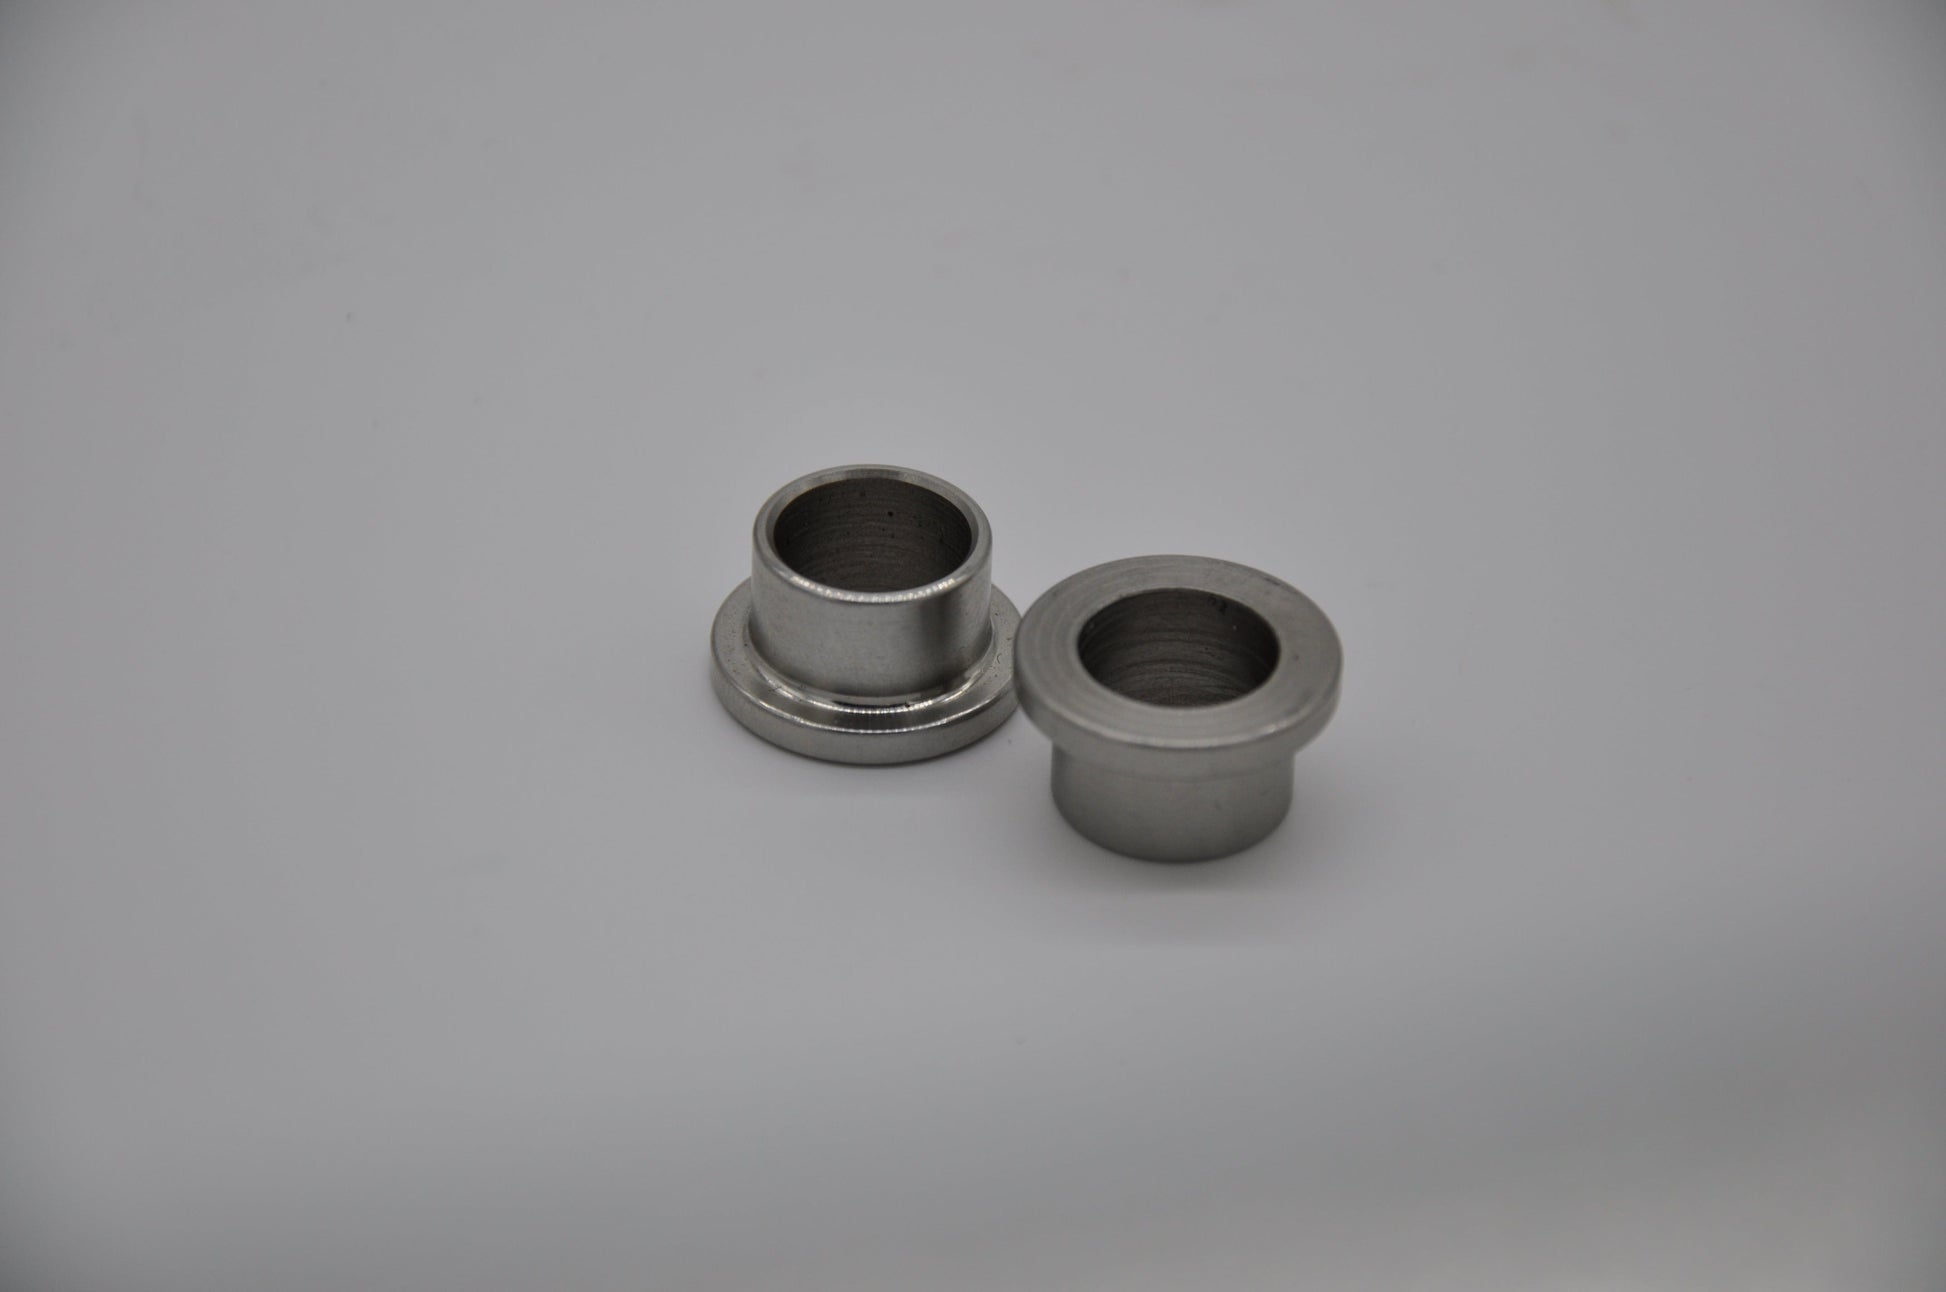 Two 10mm Flat Misalignment Spacers for Rear Radius Rods